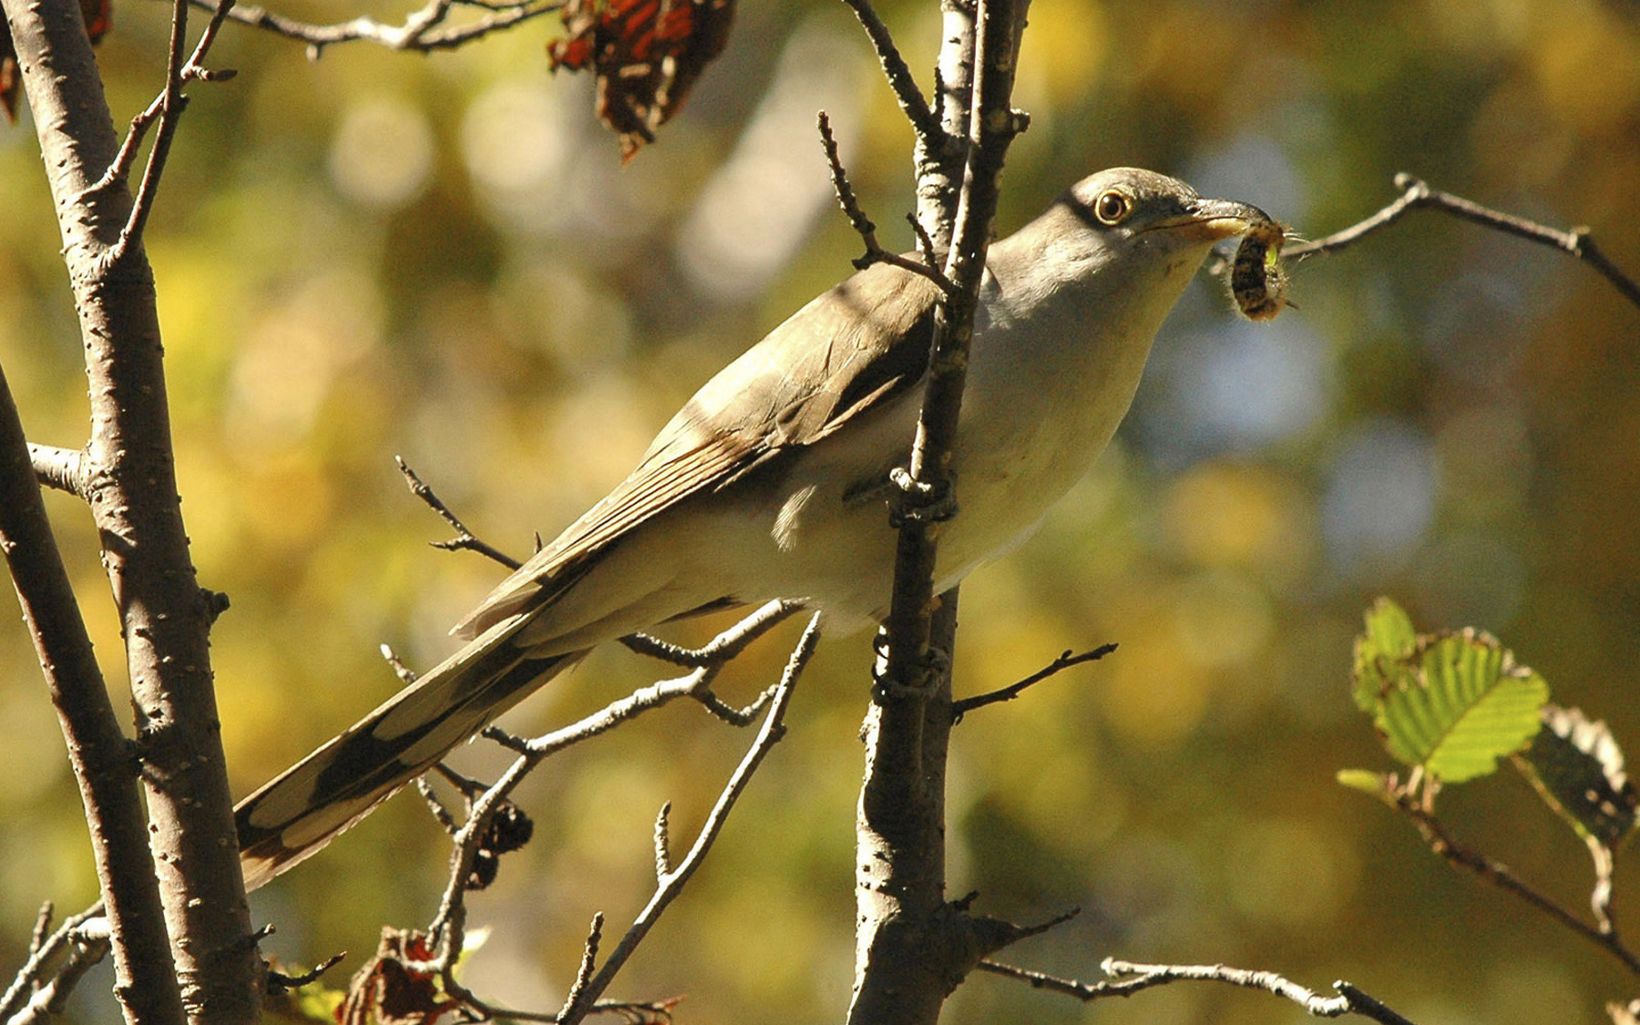 A brown bird rests on a branch.